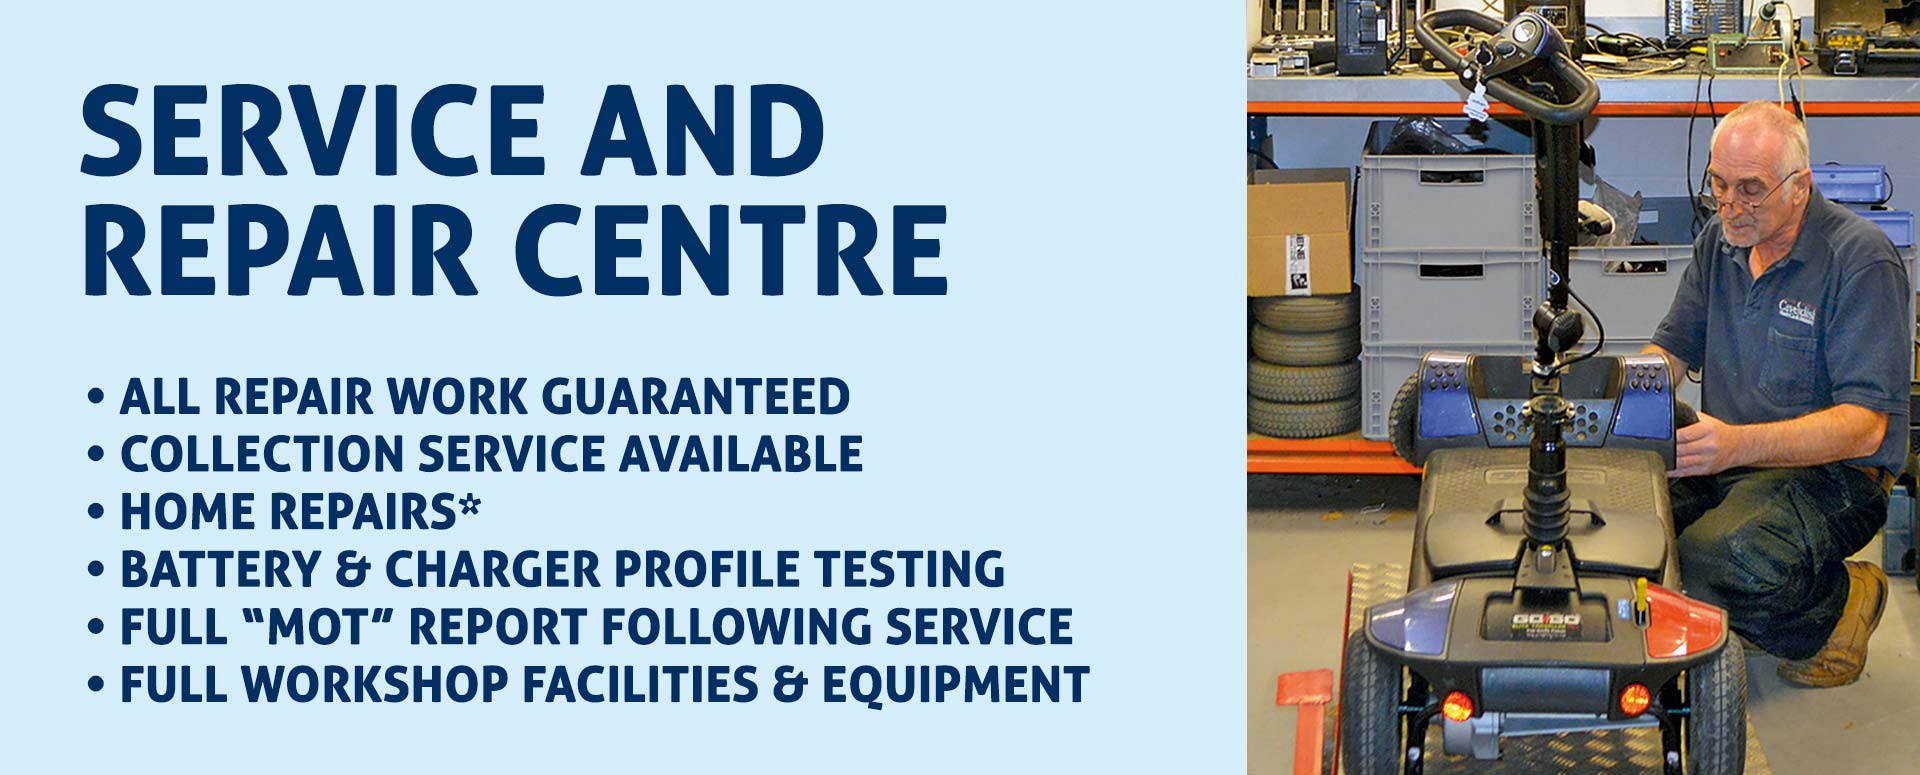 Service and Repair Centre. Collection service available.